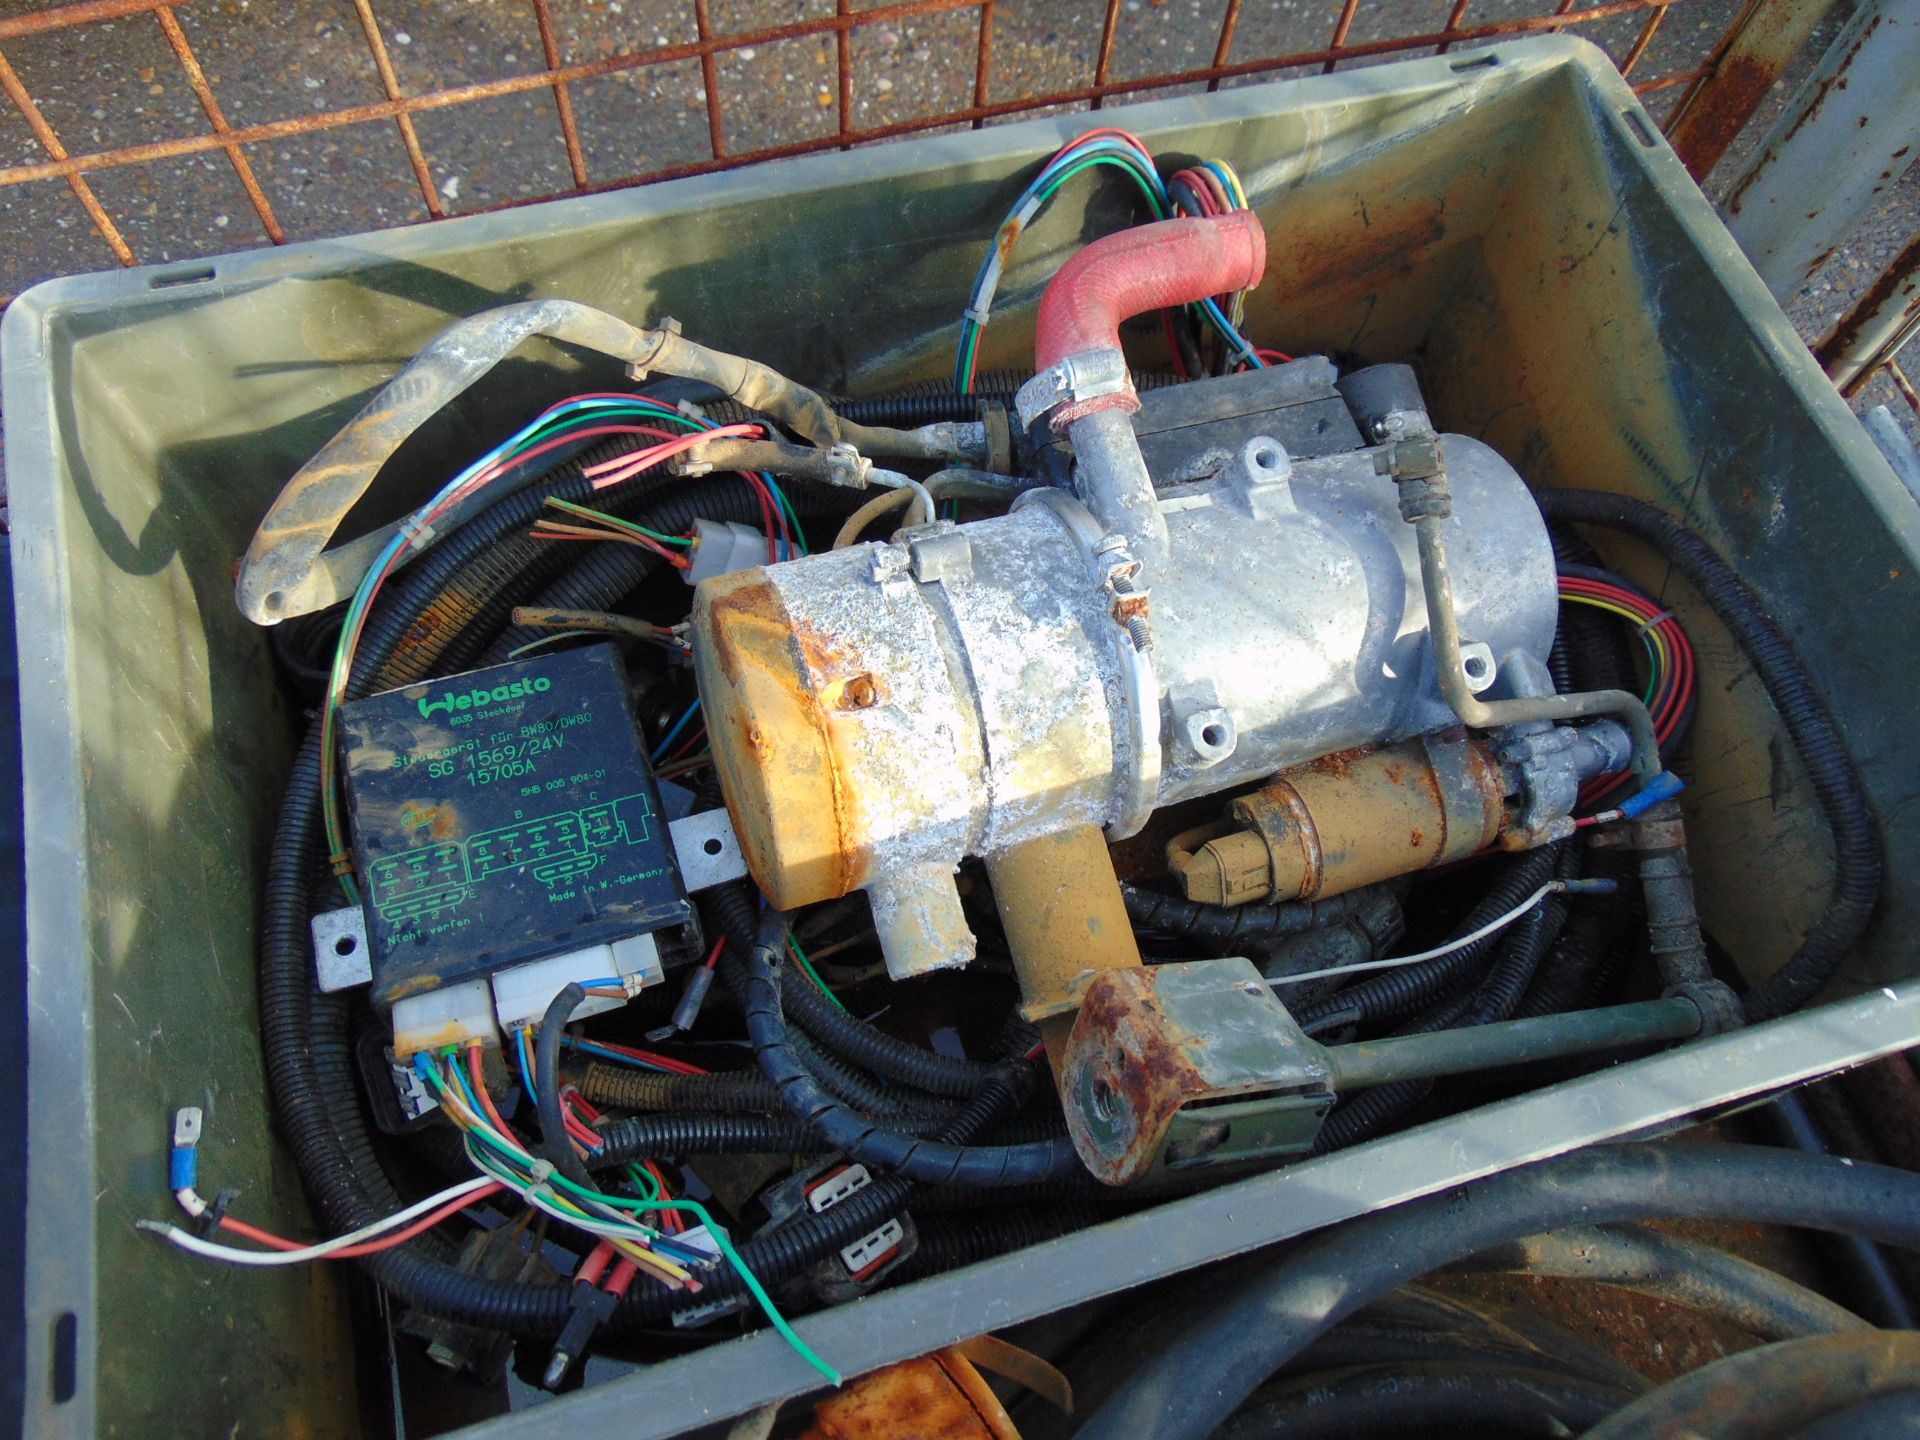 Webasto Heater, Hydraulic Hoses, Water Jerry Can etc - Image 2 of 5